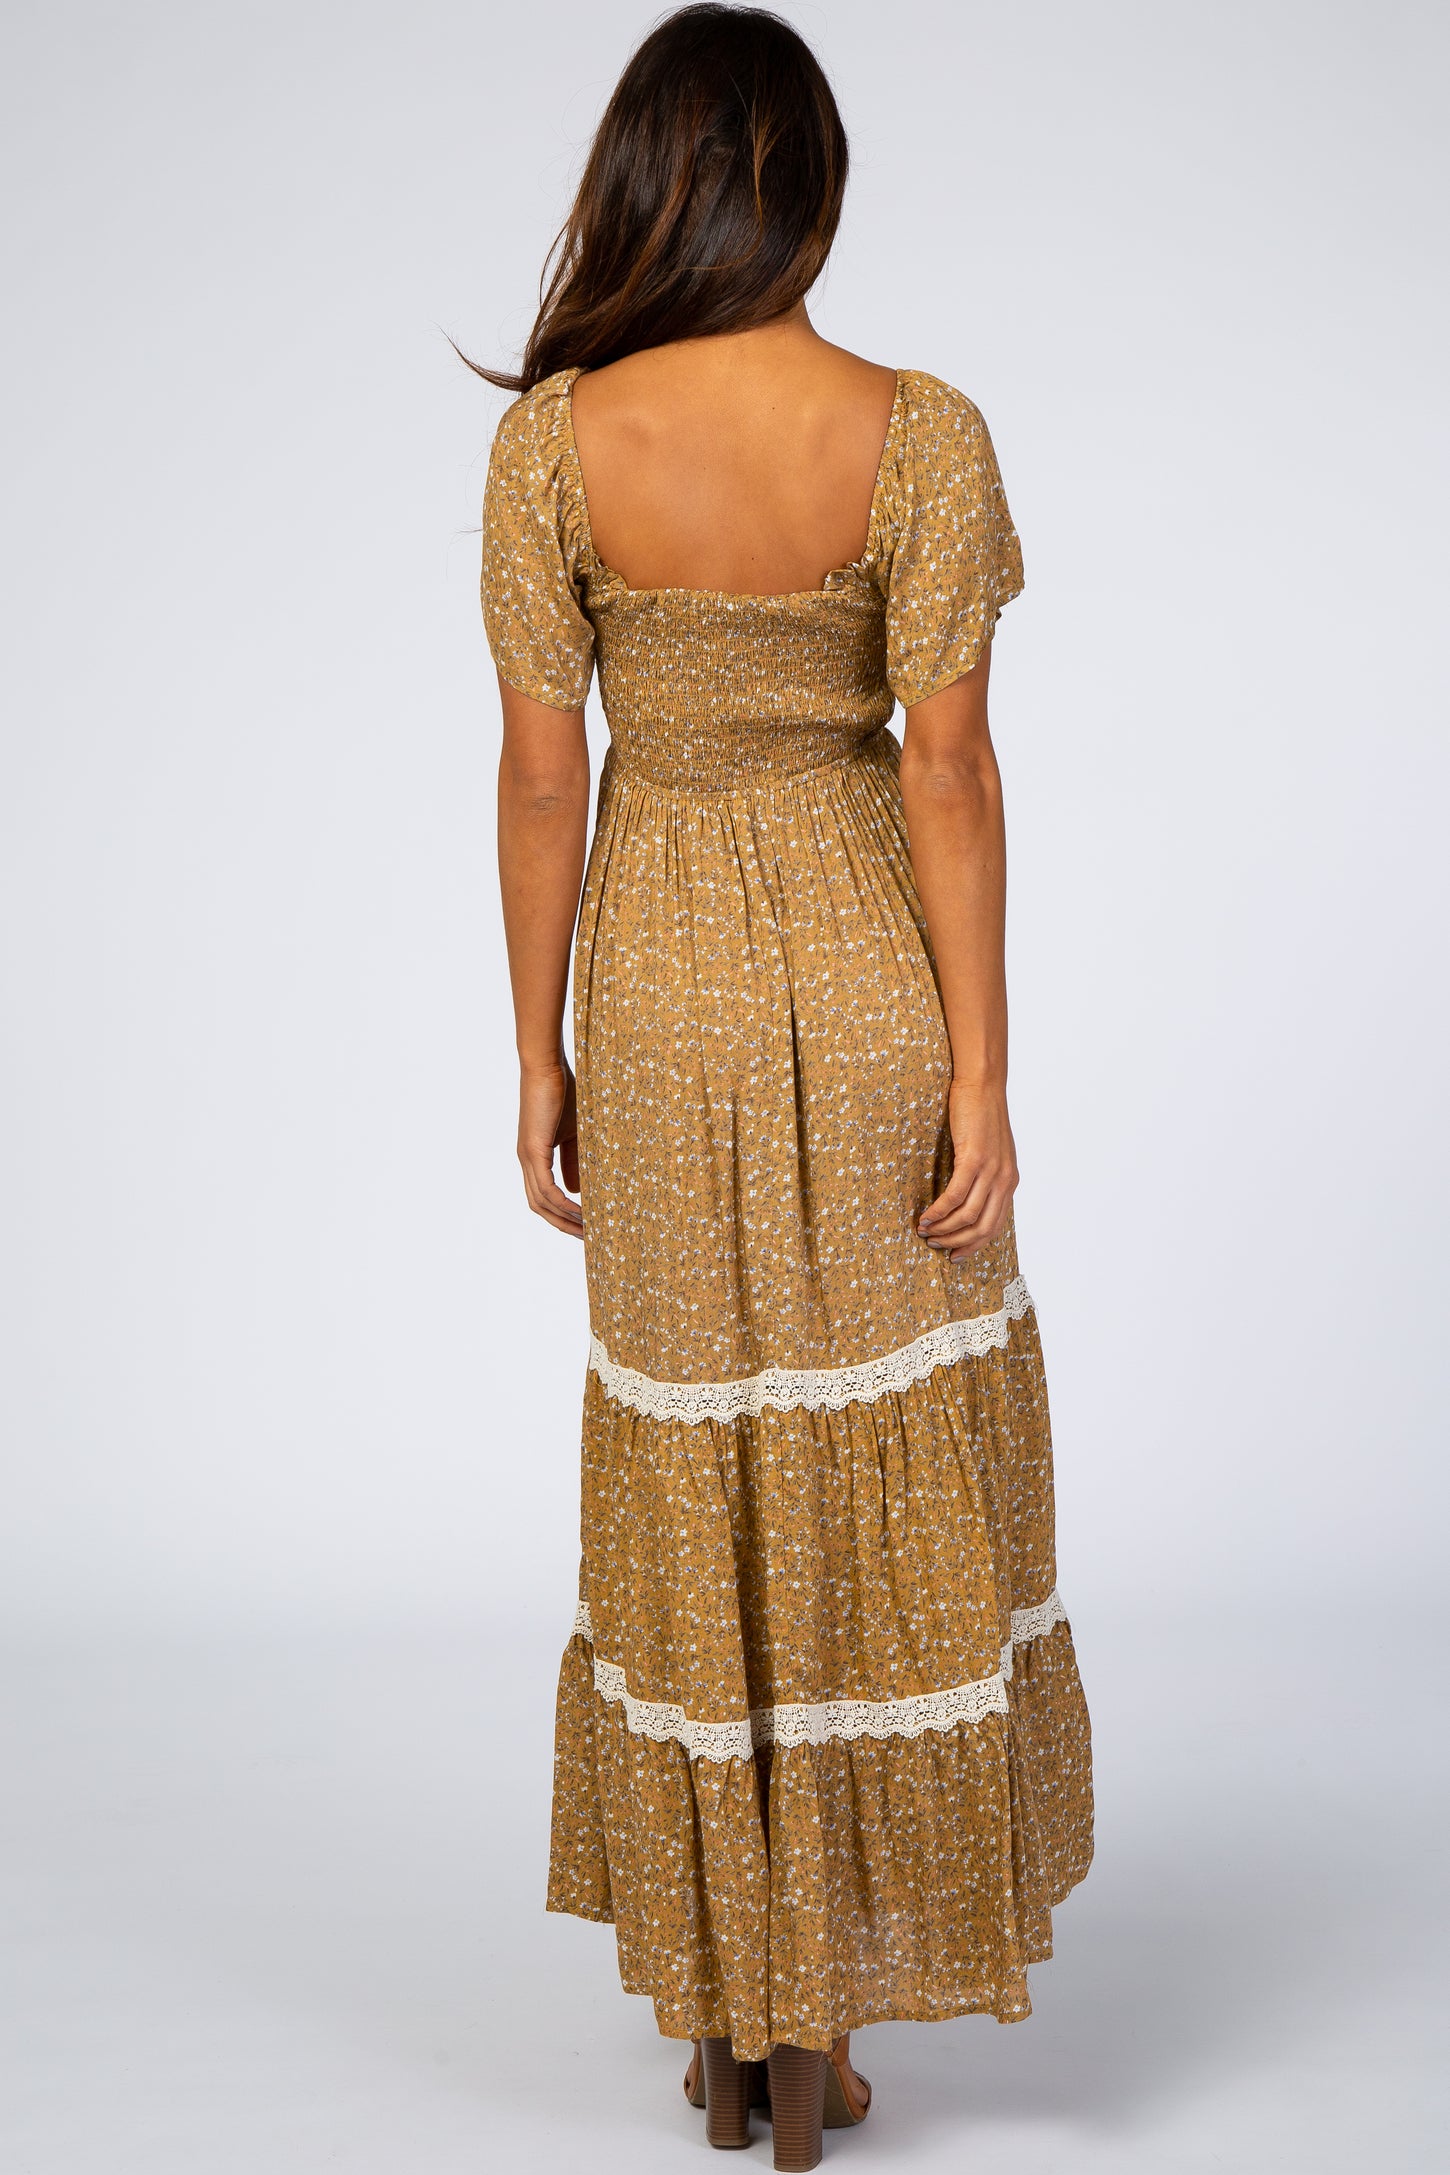 Gold Floral Square Neck Smocked Front Lace Trim Maxi Dress